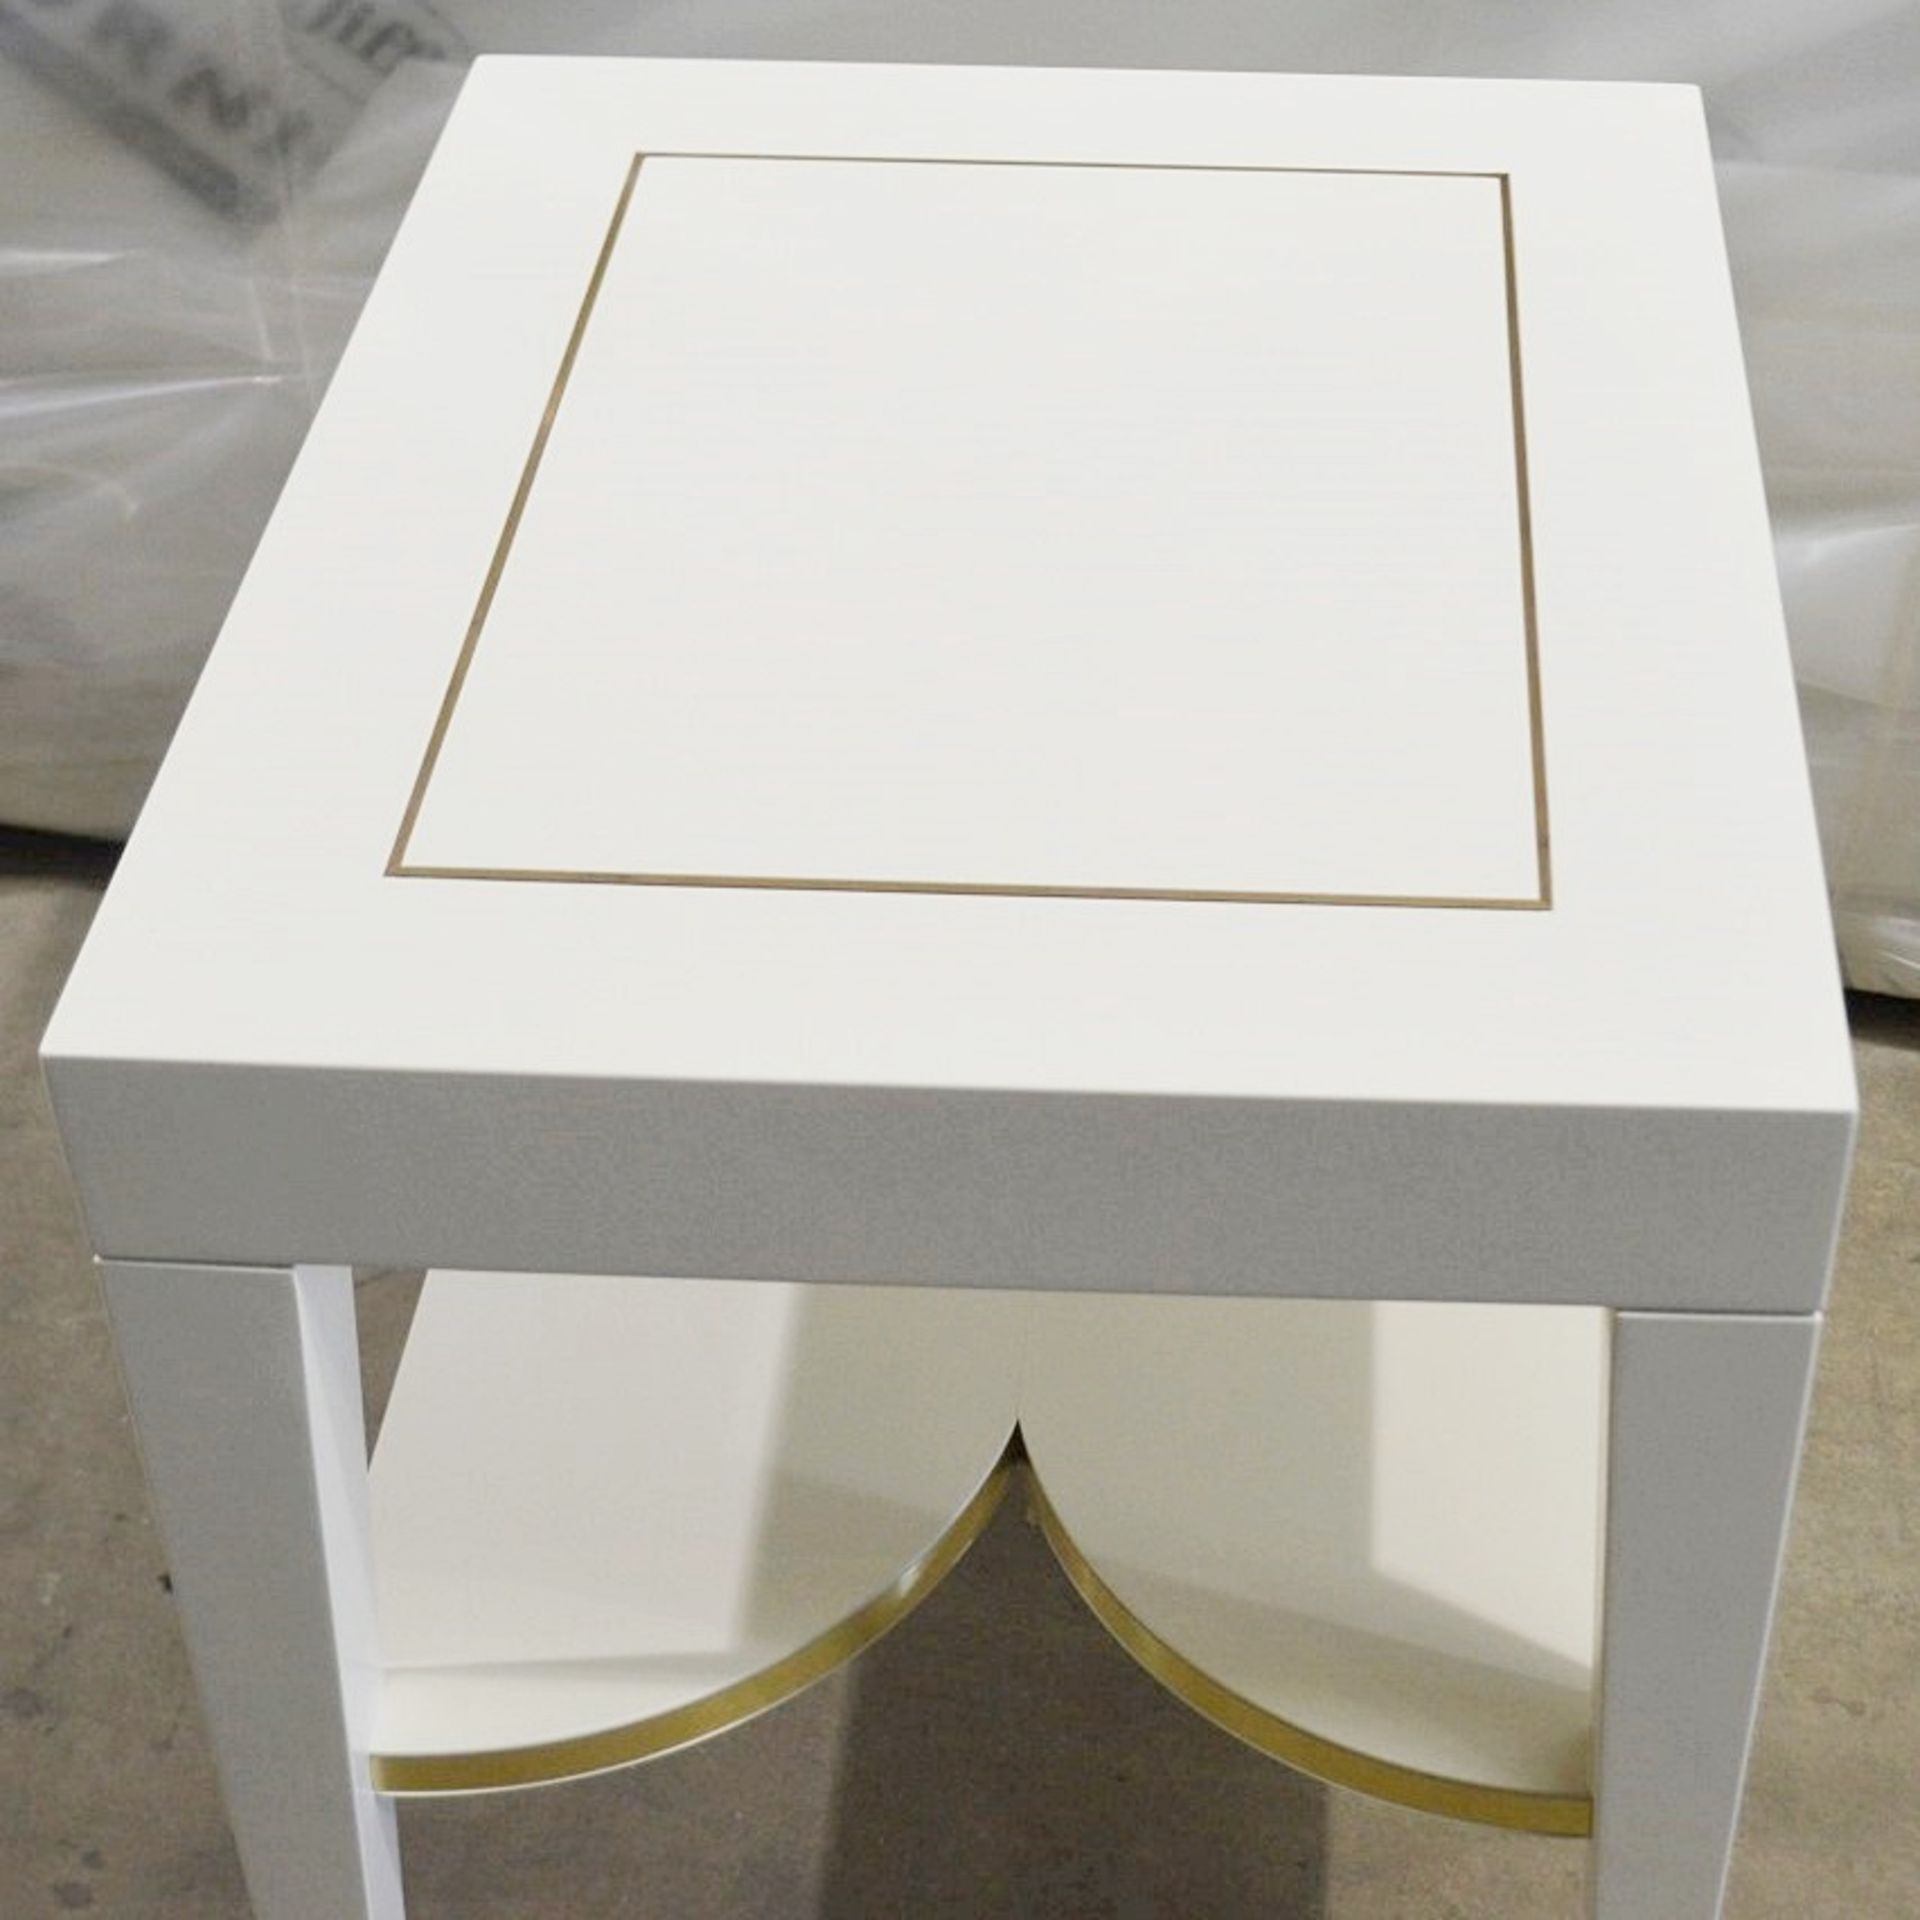 1 x JUSTIN VAN BREDA 'Alexander' Mahogany Occasional Side Table In Cream - Dimensions: W60 x D50 x H - Image 5 of 6